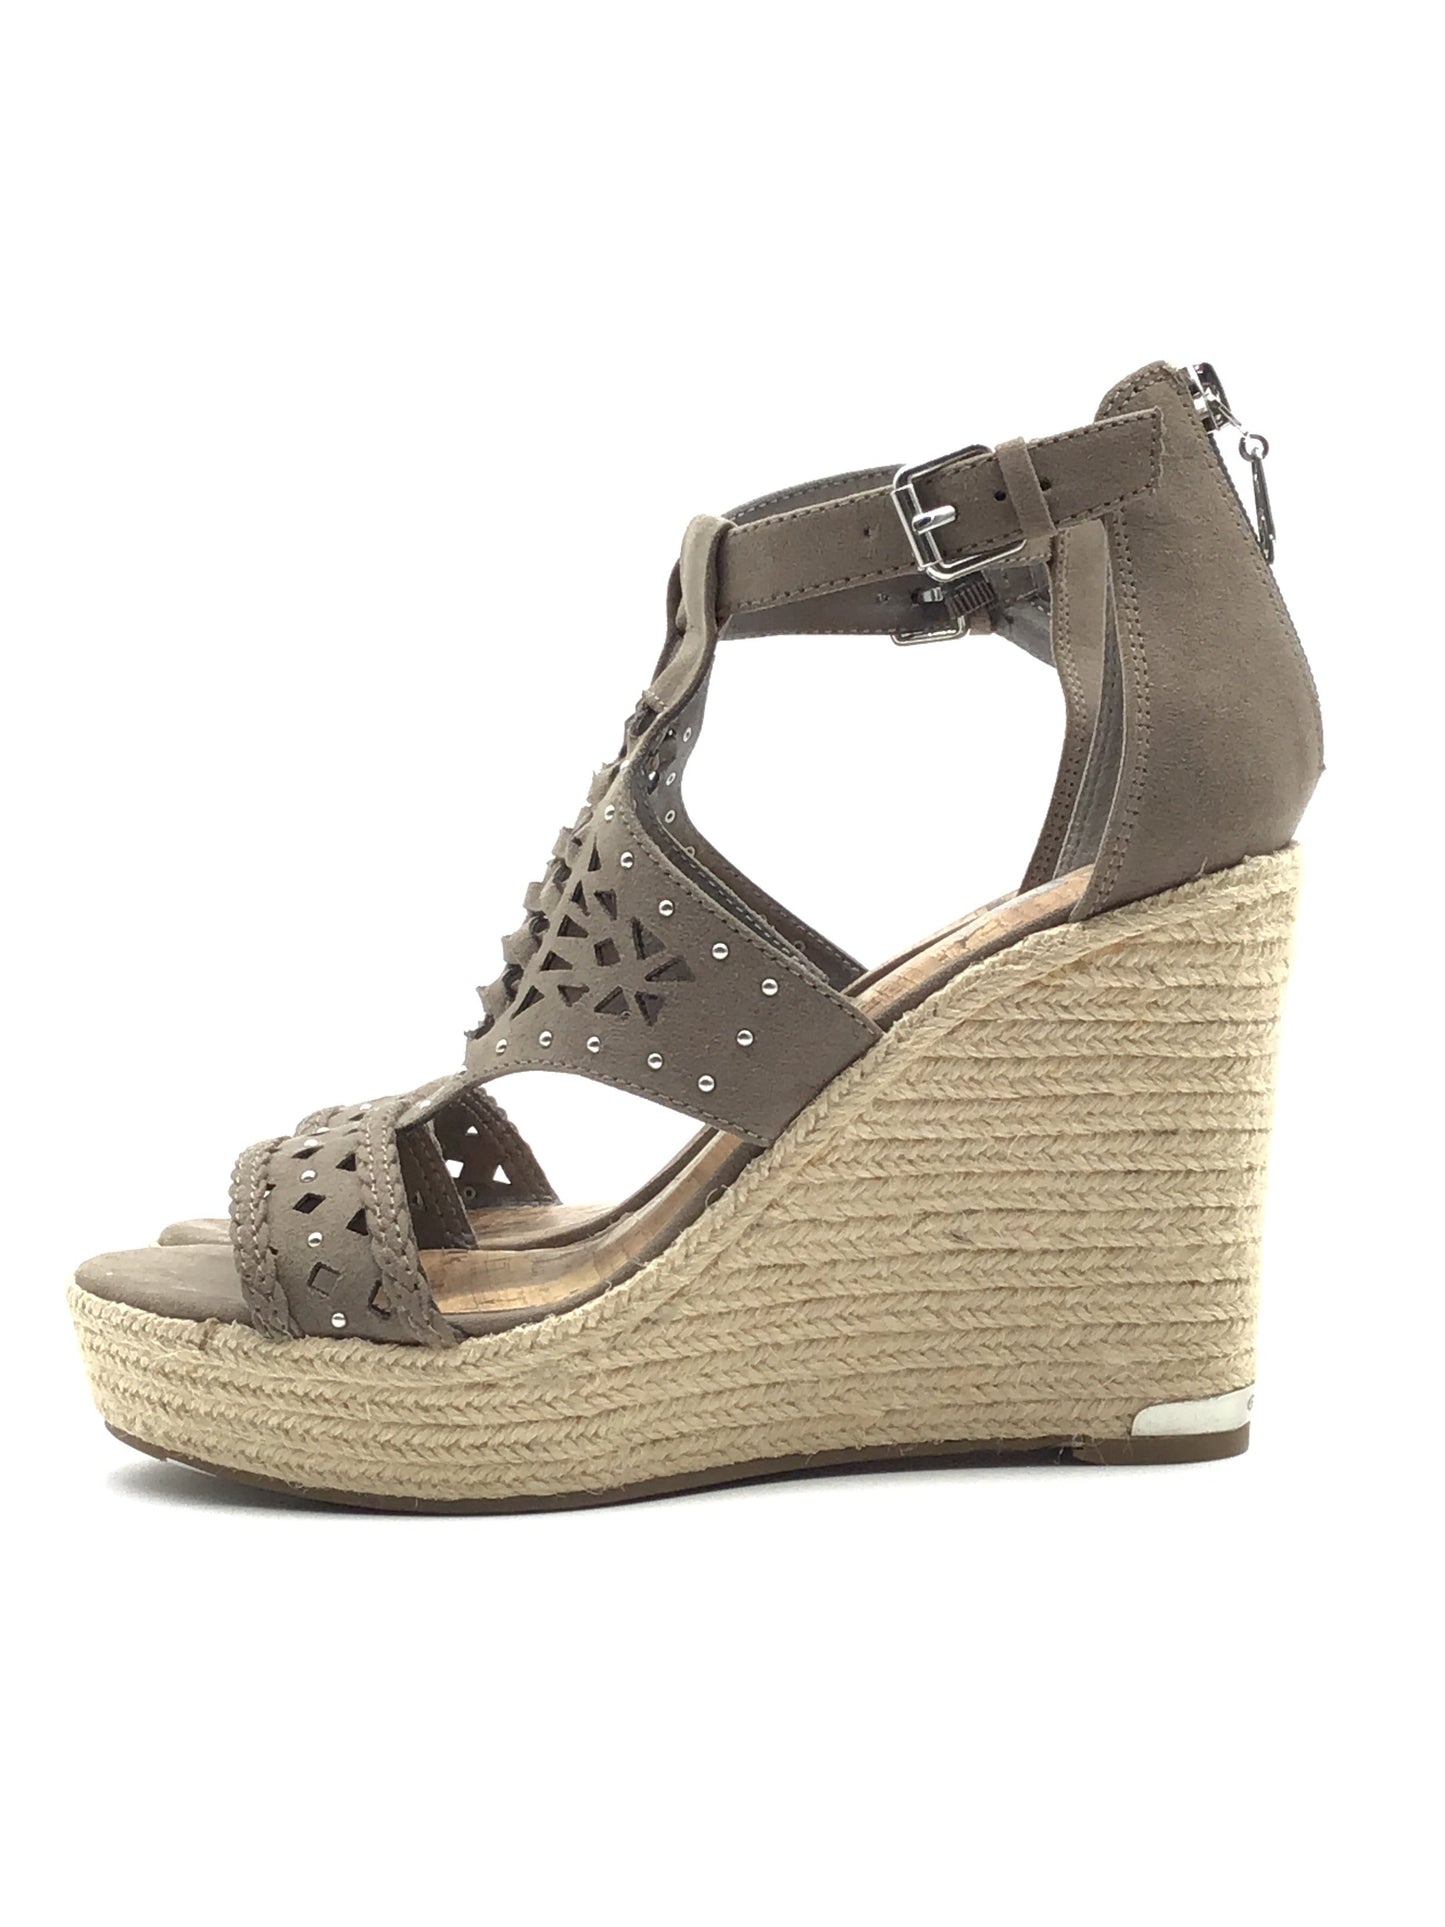 Shoes Heels Wedge By Guess  Size: 8.5